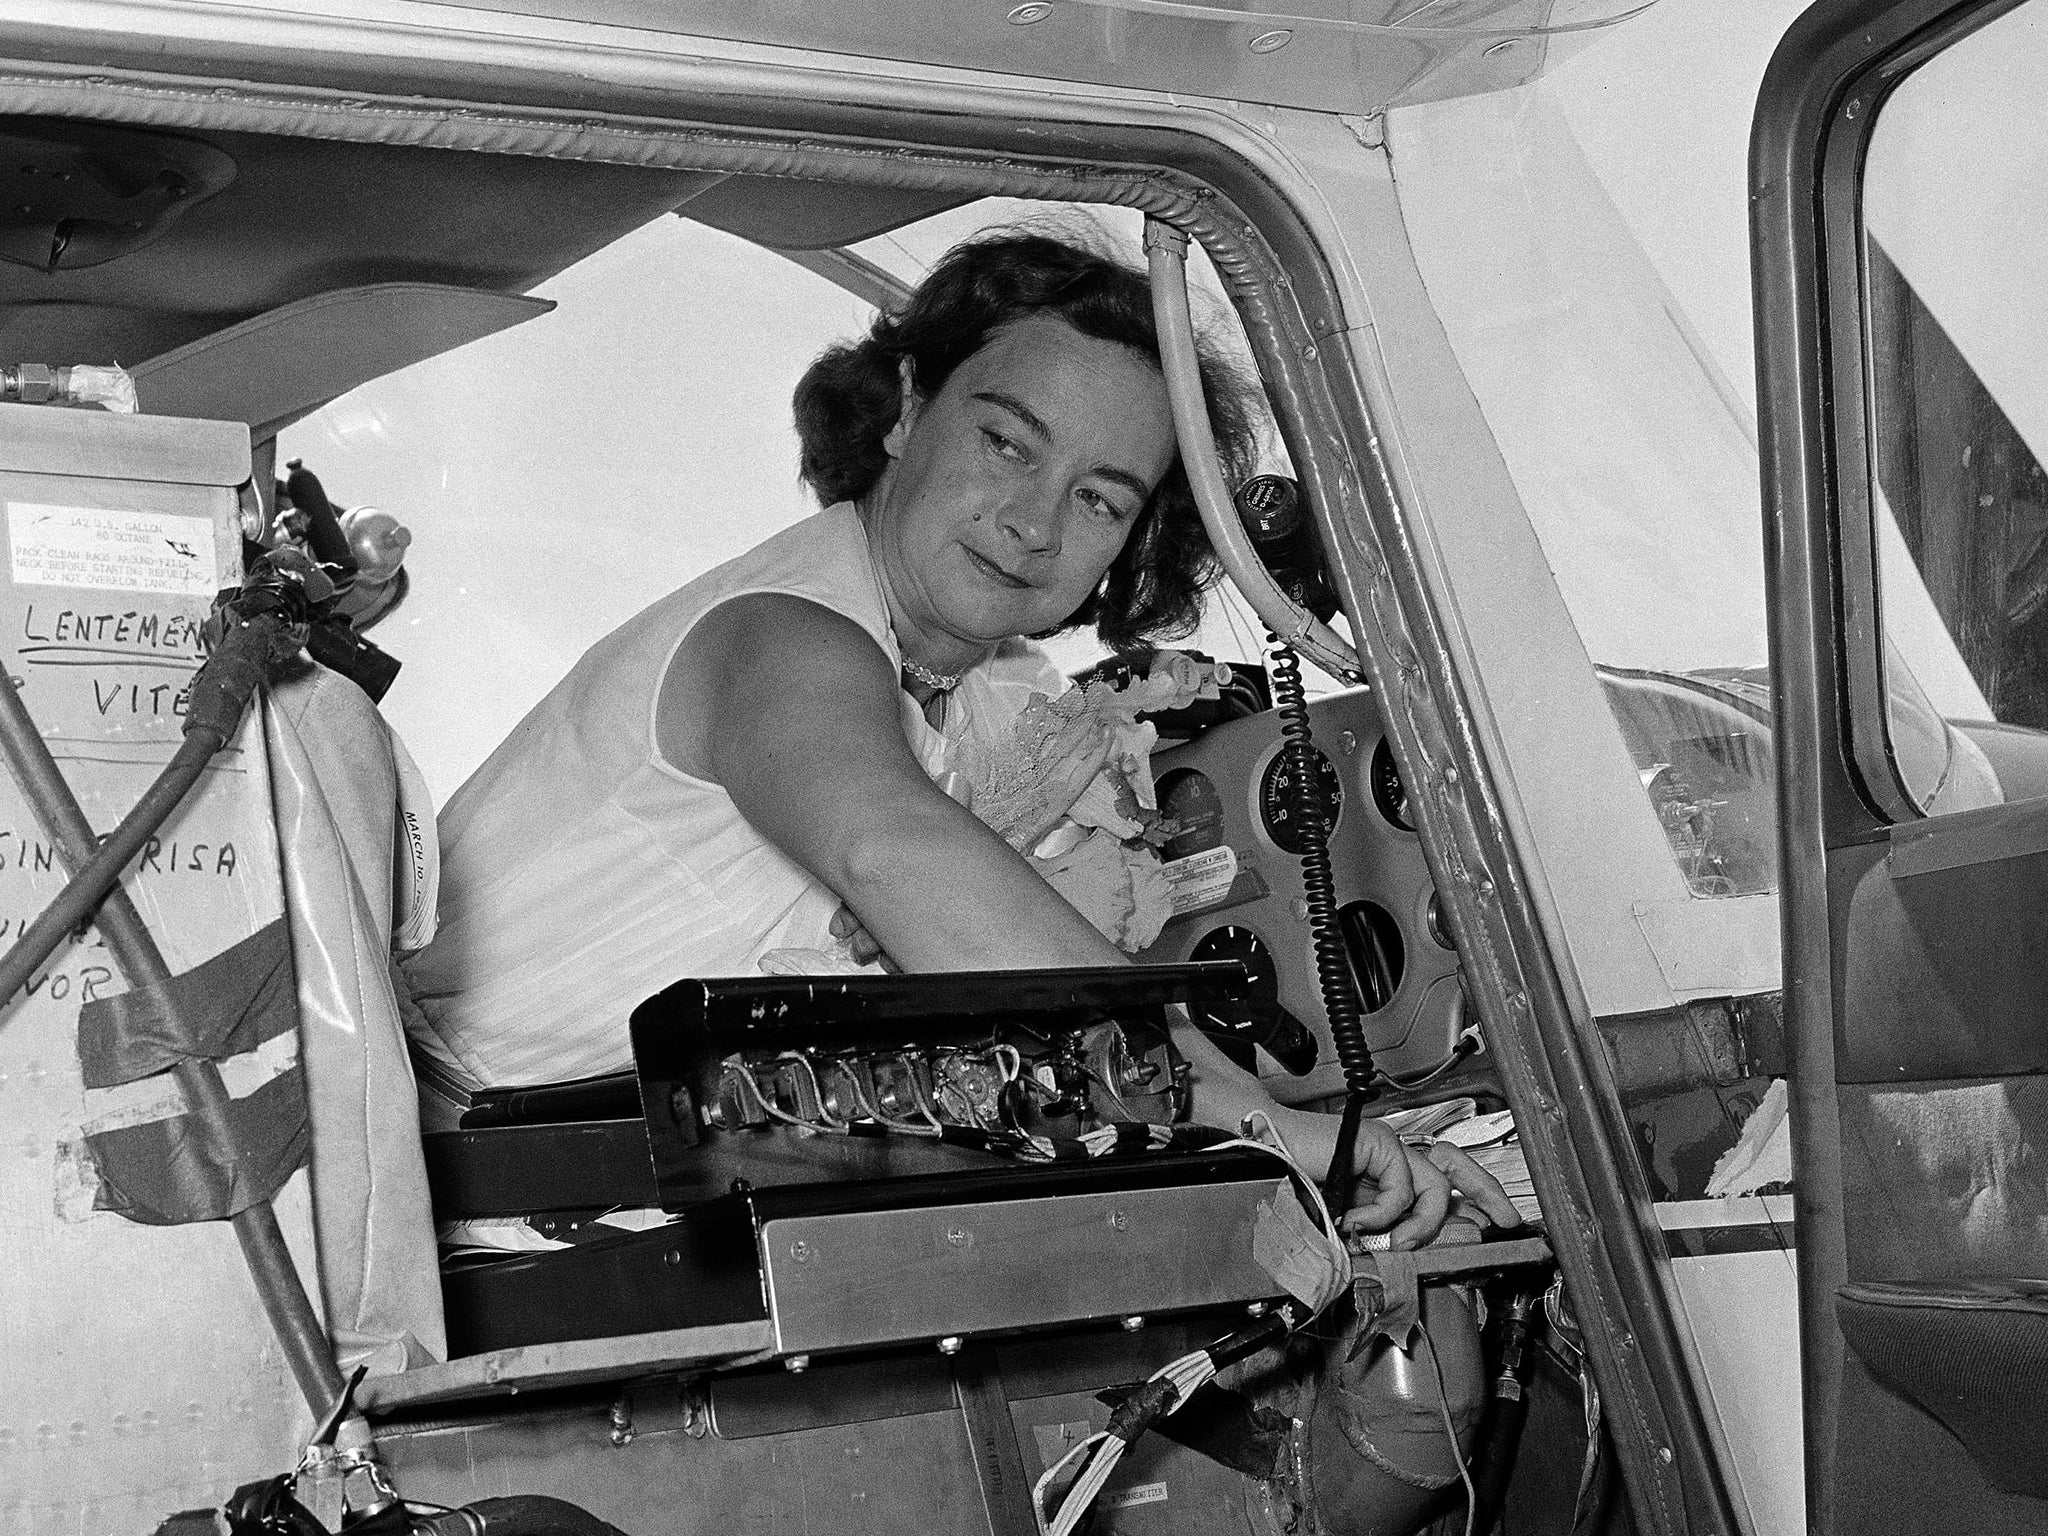 Geraldine 'Jerrie' Mock, the first female pilot to fly solo around the globe